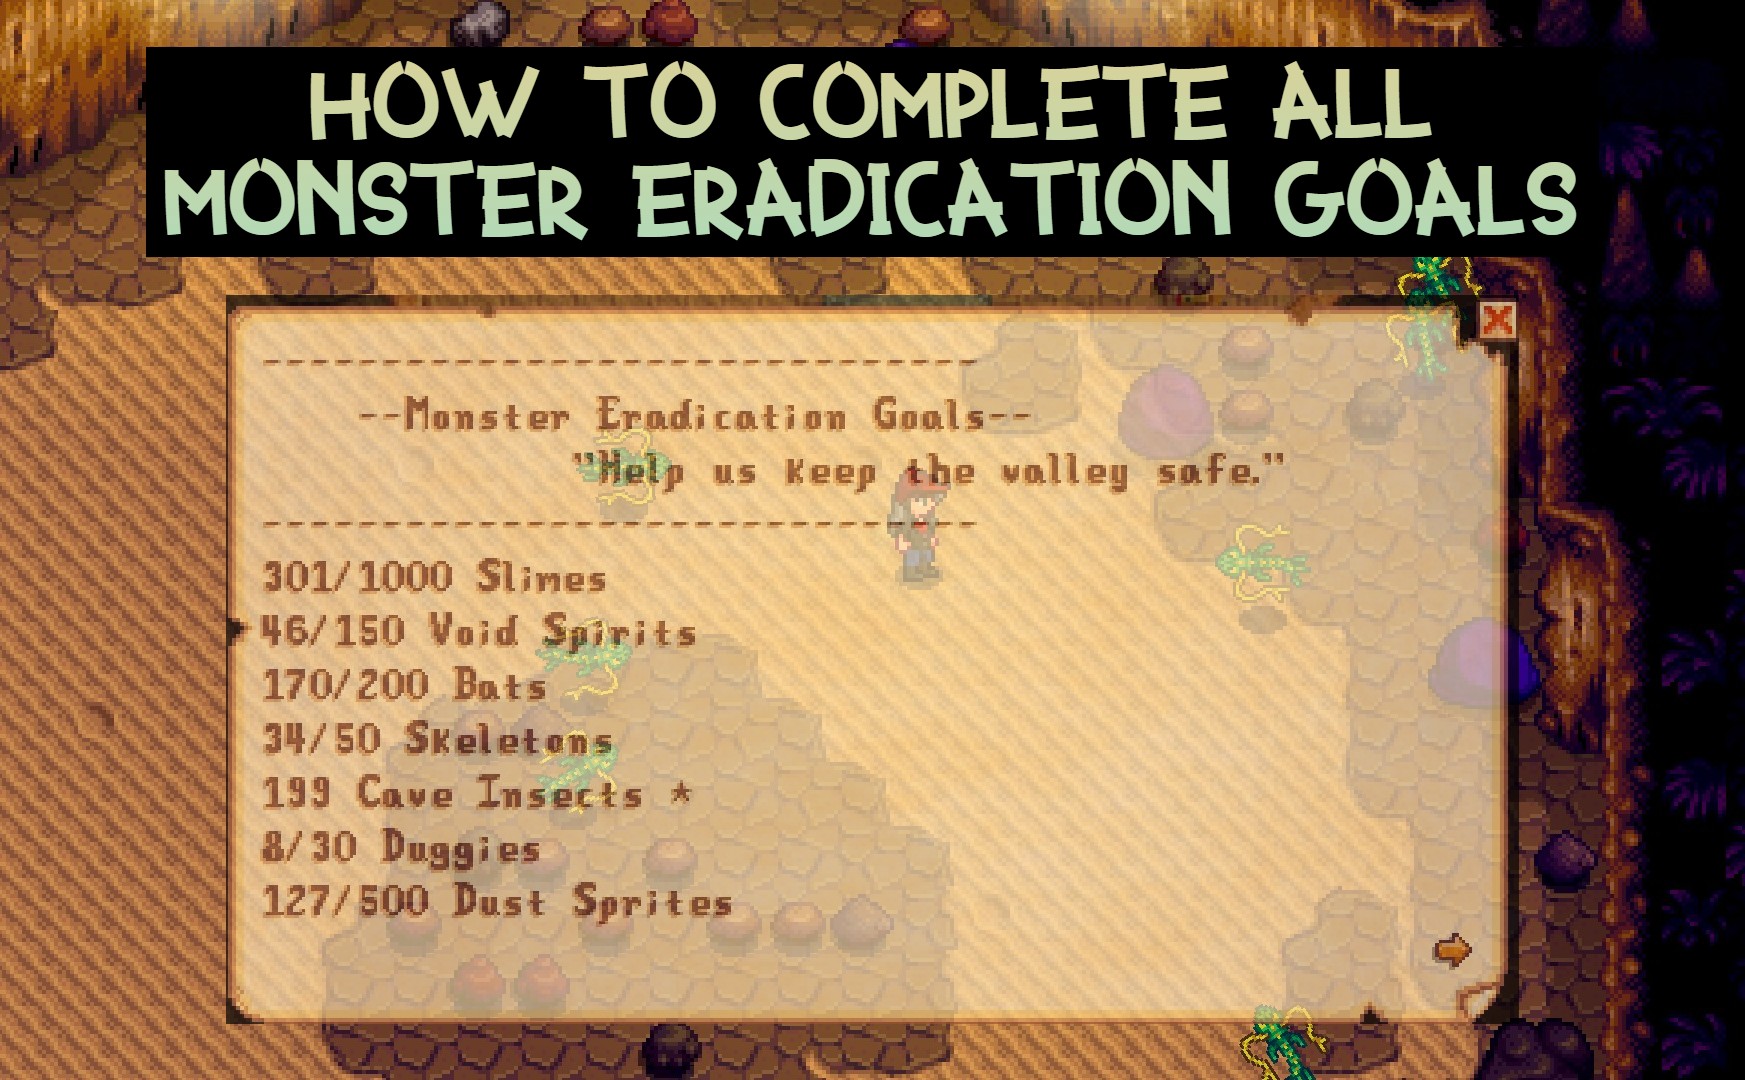 How to Complete All Monster Eradication Goals in Stardew Valley